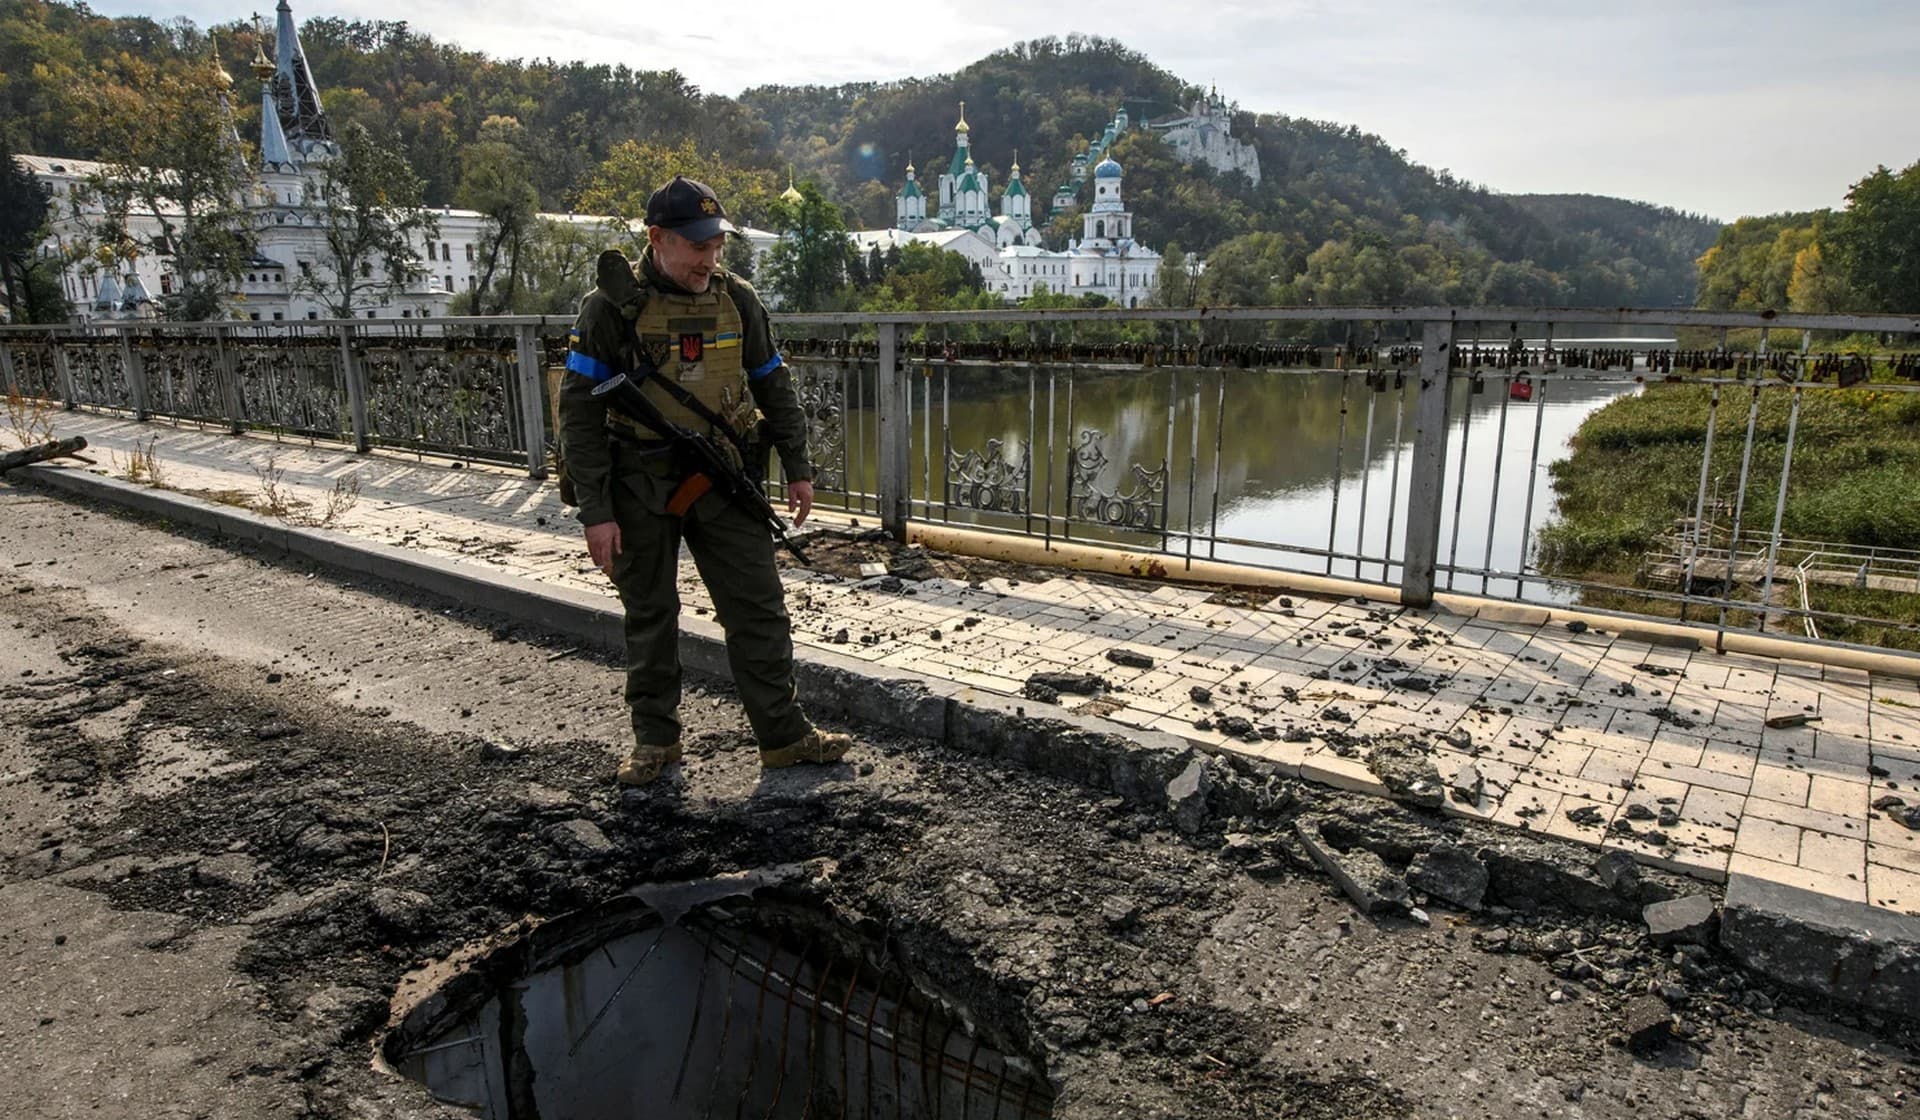 A service member of Ukraine's National Guard stands at a bridge over the Siverskyi Donets River destroyed during Russia's attack on Ukraine in the town of Sviatohirsk, Donetsk Region, Ukraine, October 1, 2022.